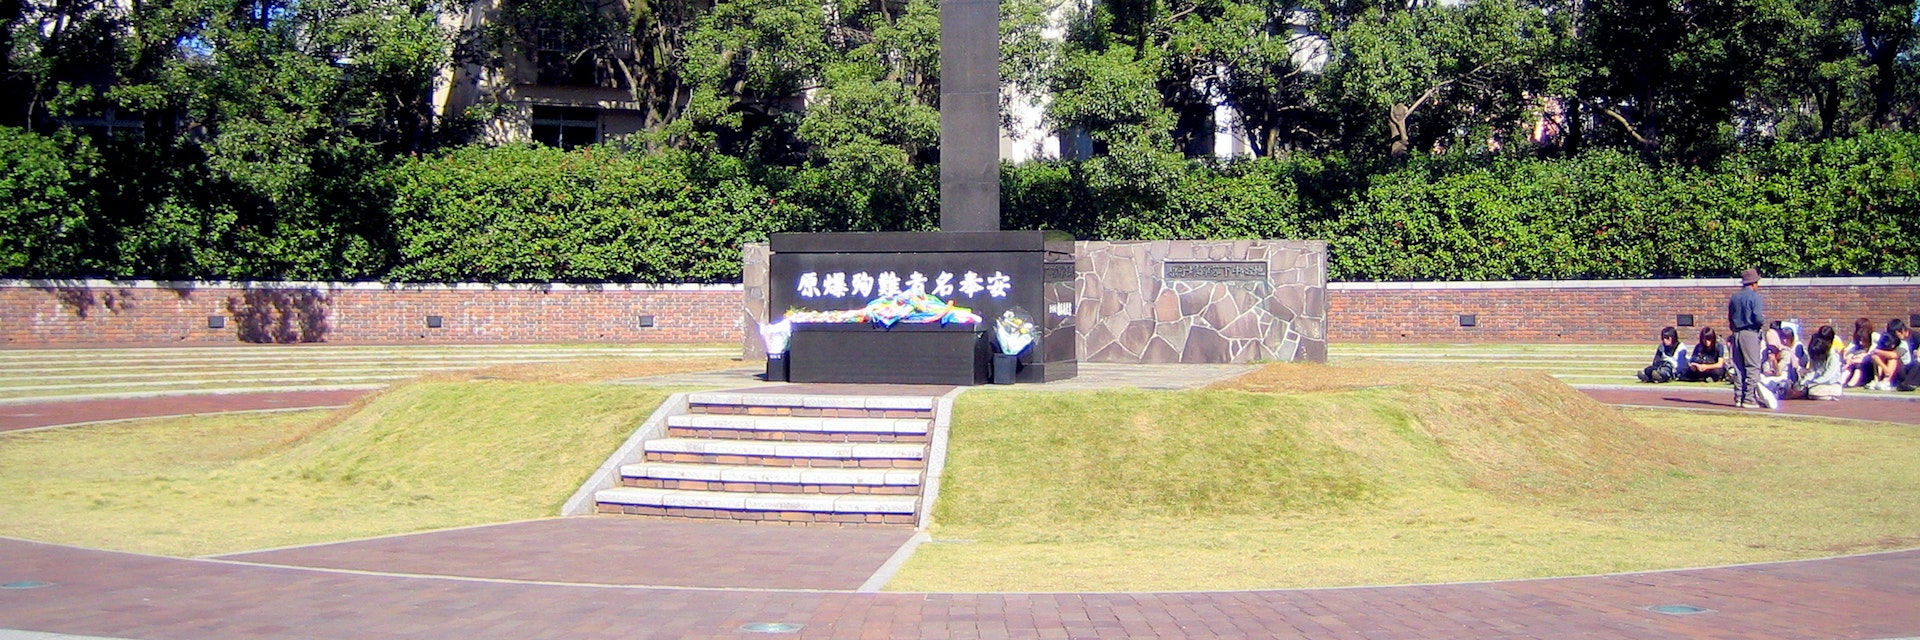 The monument at the hypocenter of the atomic bomb explosion in Nagasaki, Japan; Shutterstock ID 40978522